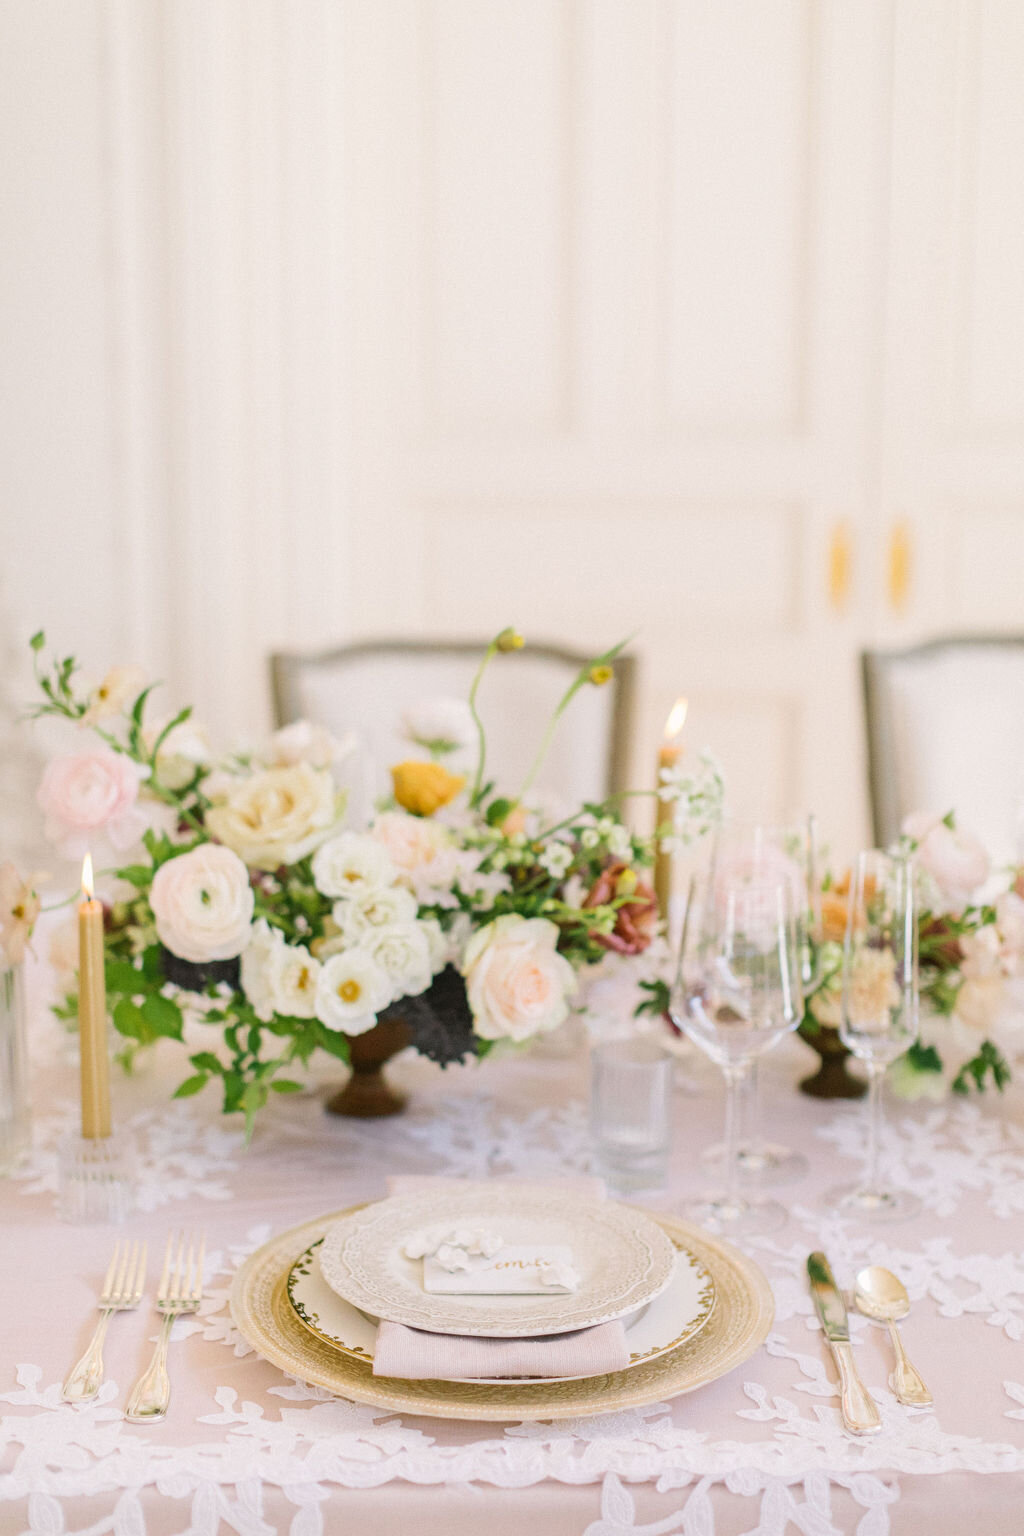 Table setting at the Olana with a white lace overlay